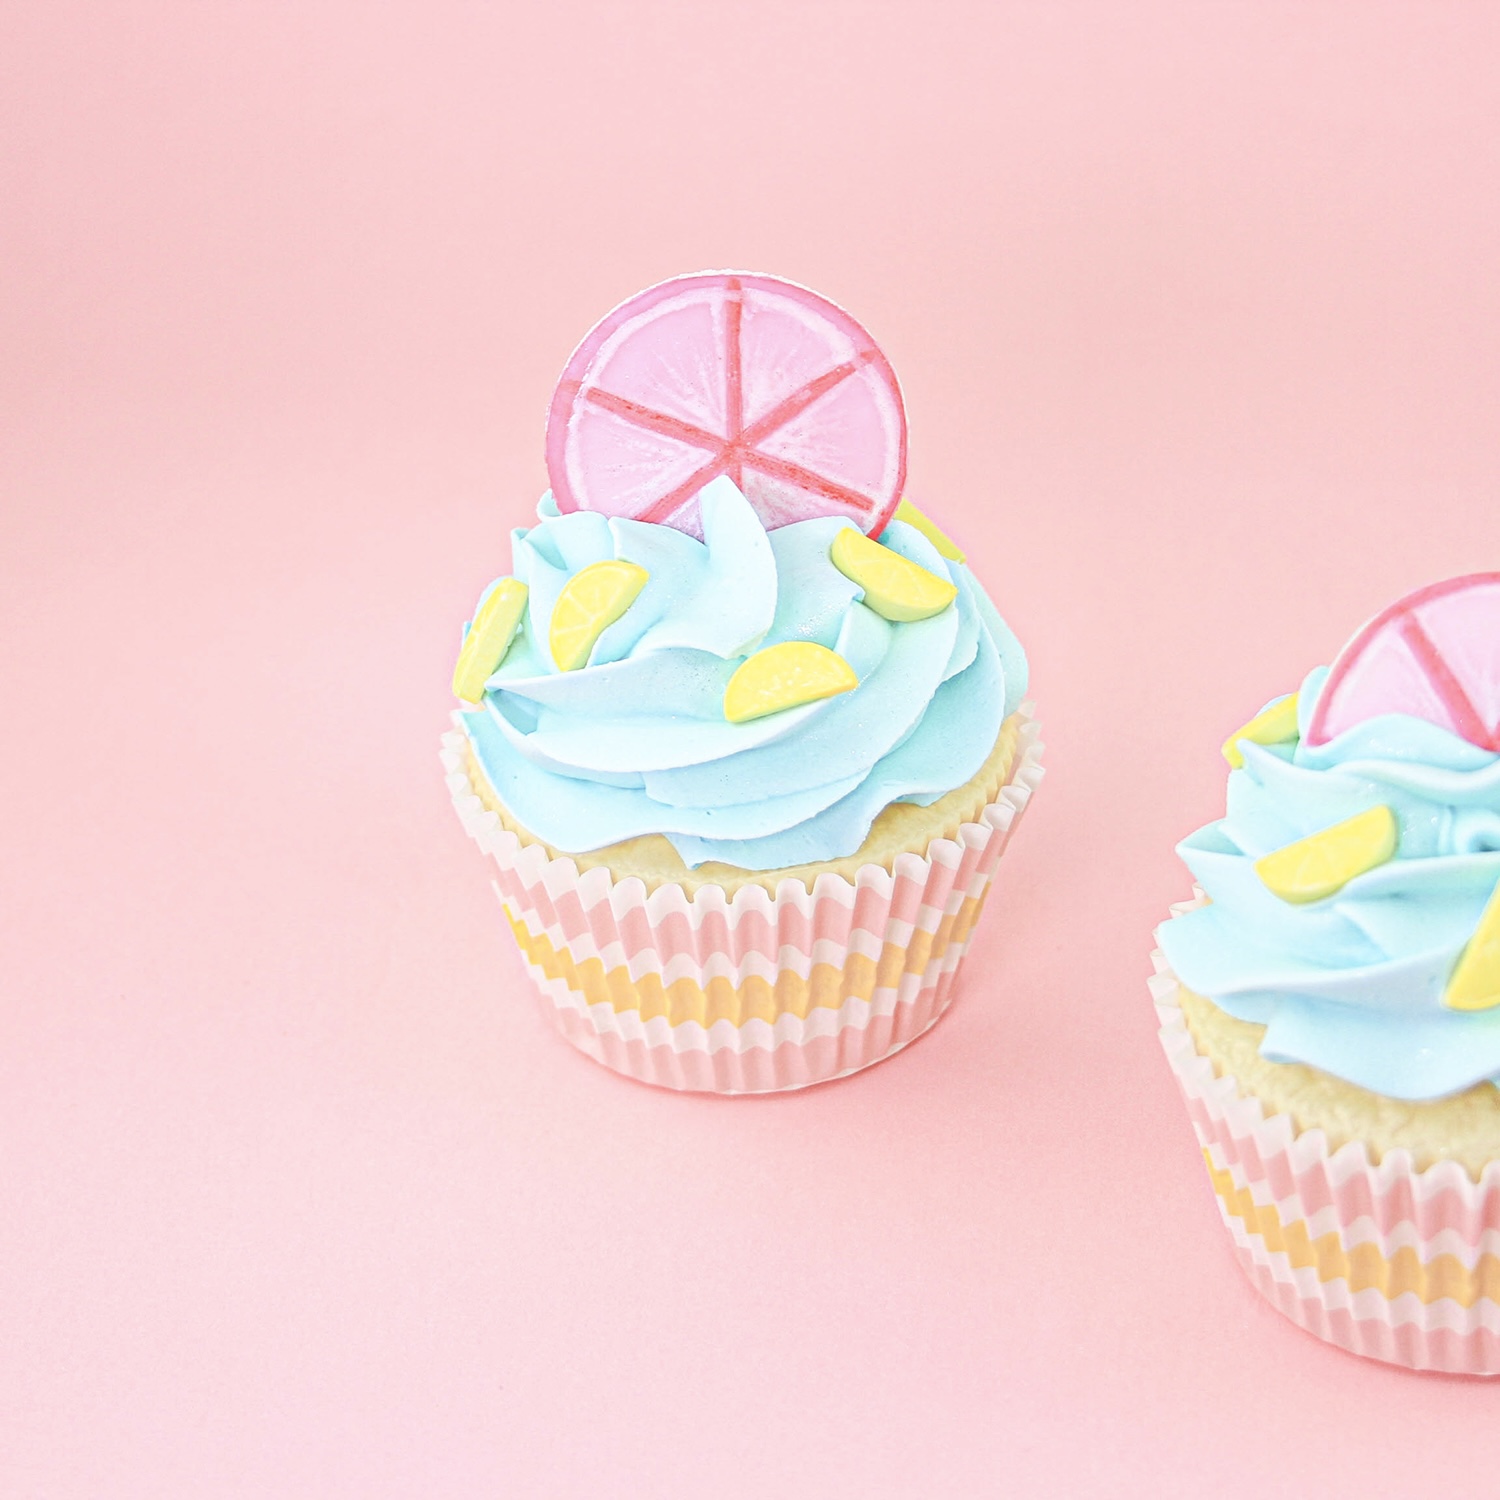 Blue buttercream swirled cupcake with a hand painted pink lemon slice fondant topper and lemon sprinkles.